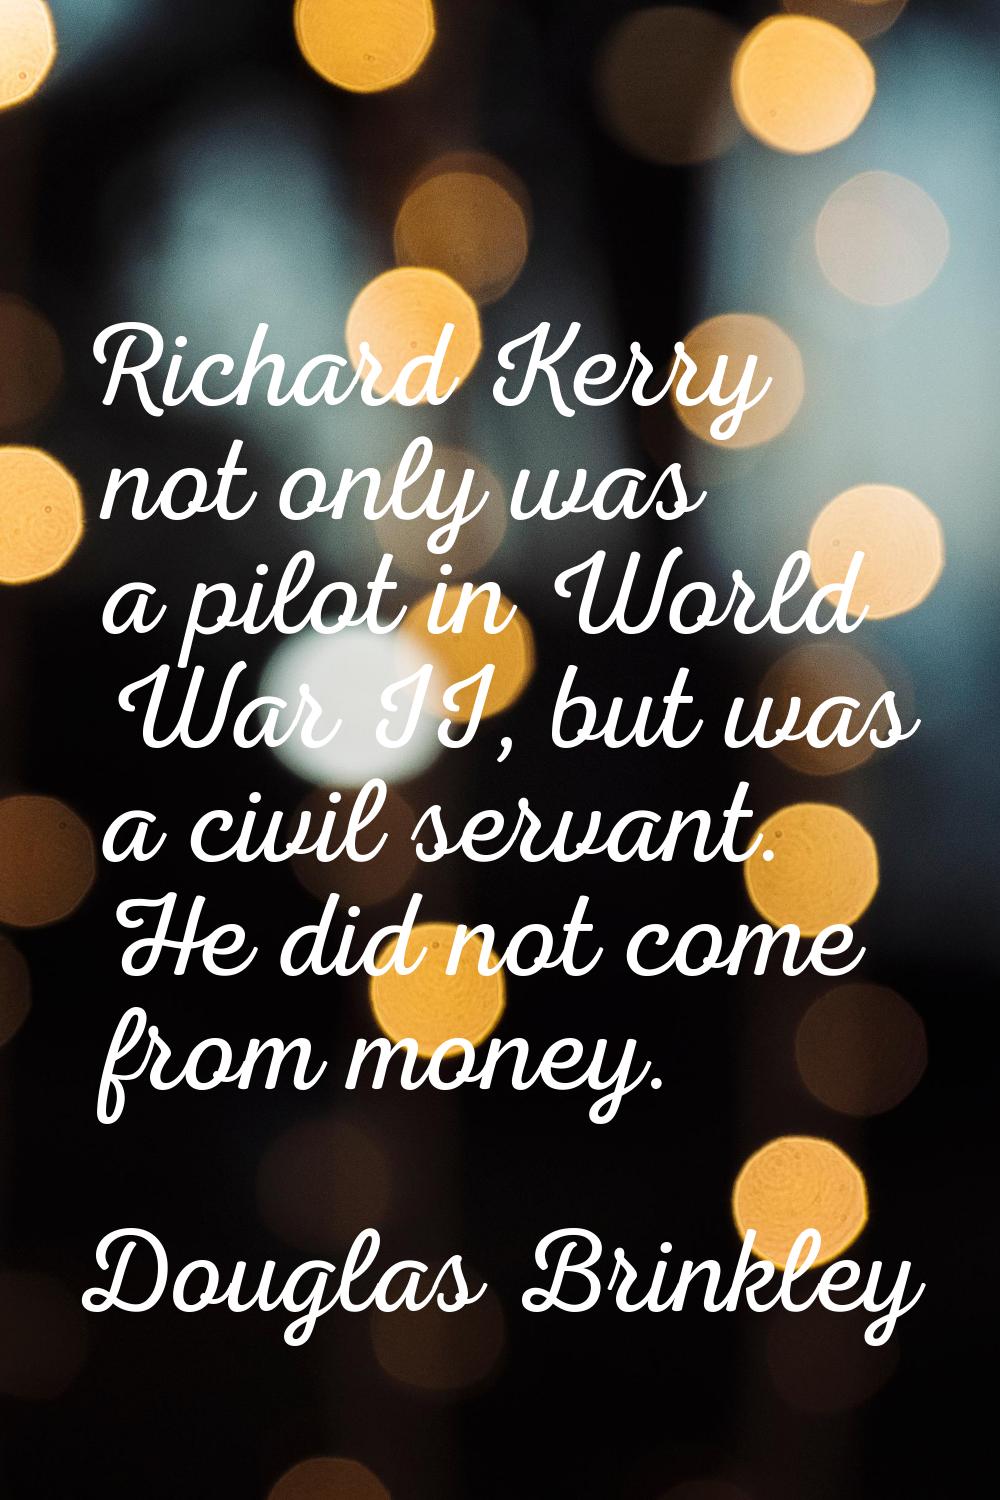 Richard Kerry not only was a pilot in World War II, but was a civil servant. He did not come from m